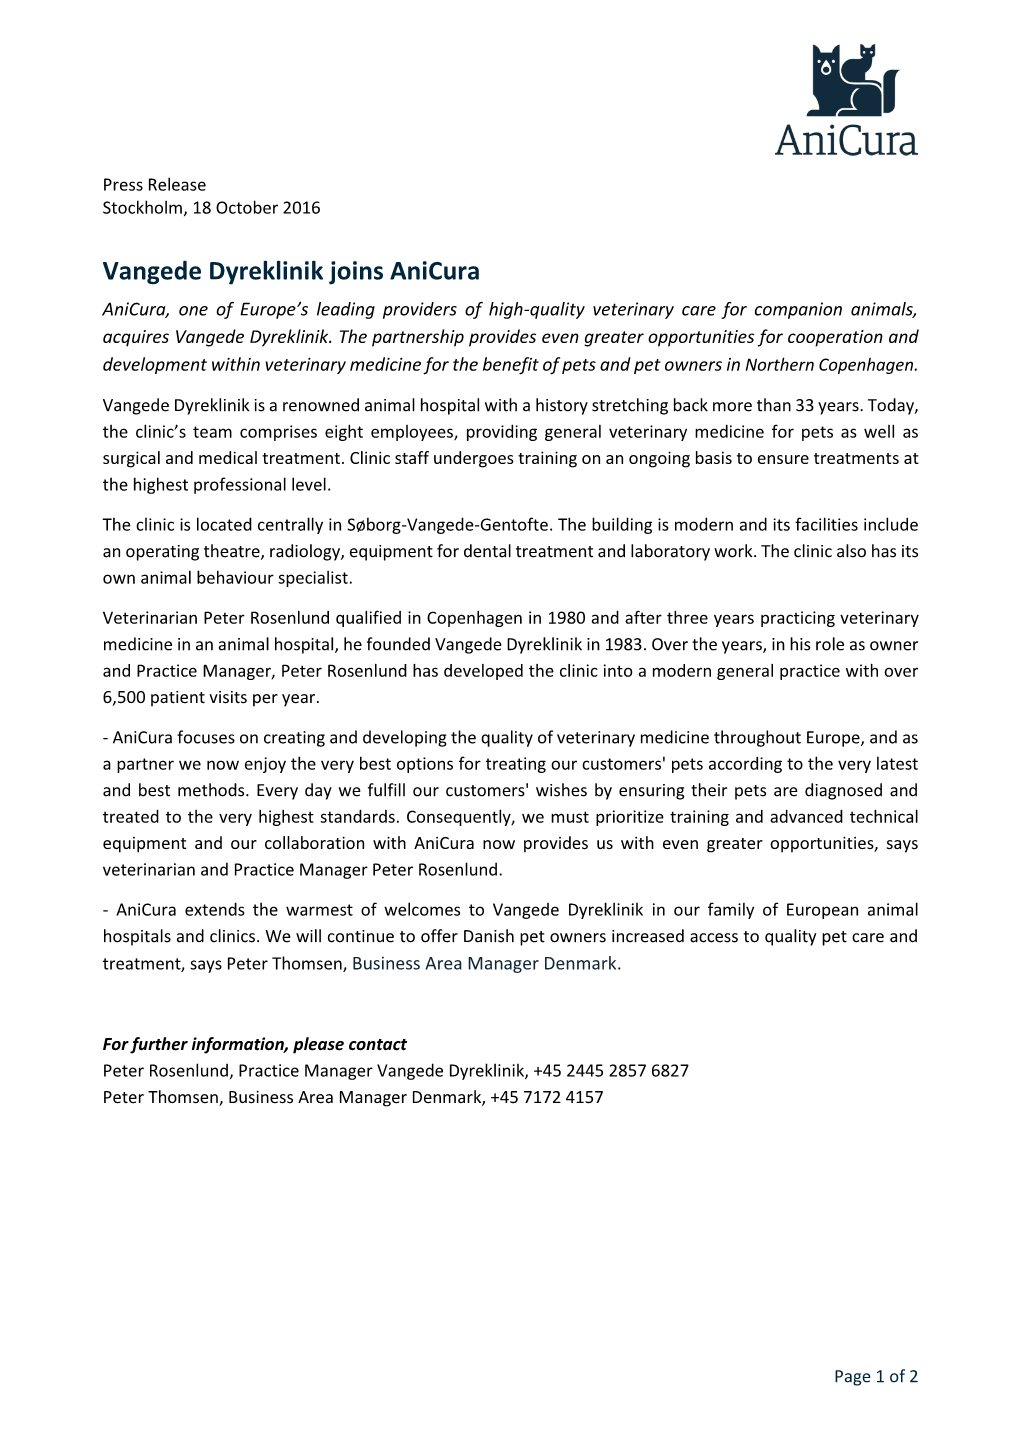 Vangede Dyreklinik Joins Anicura Anicura, One of Europe’S Leading Providers of High-Quality Veterinary Care for Companion Animals, Acquires Vangede Dyreklinik